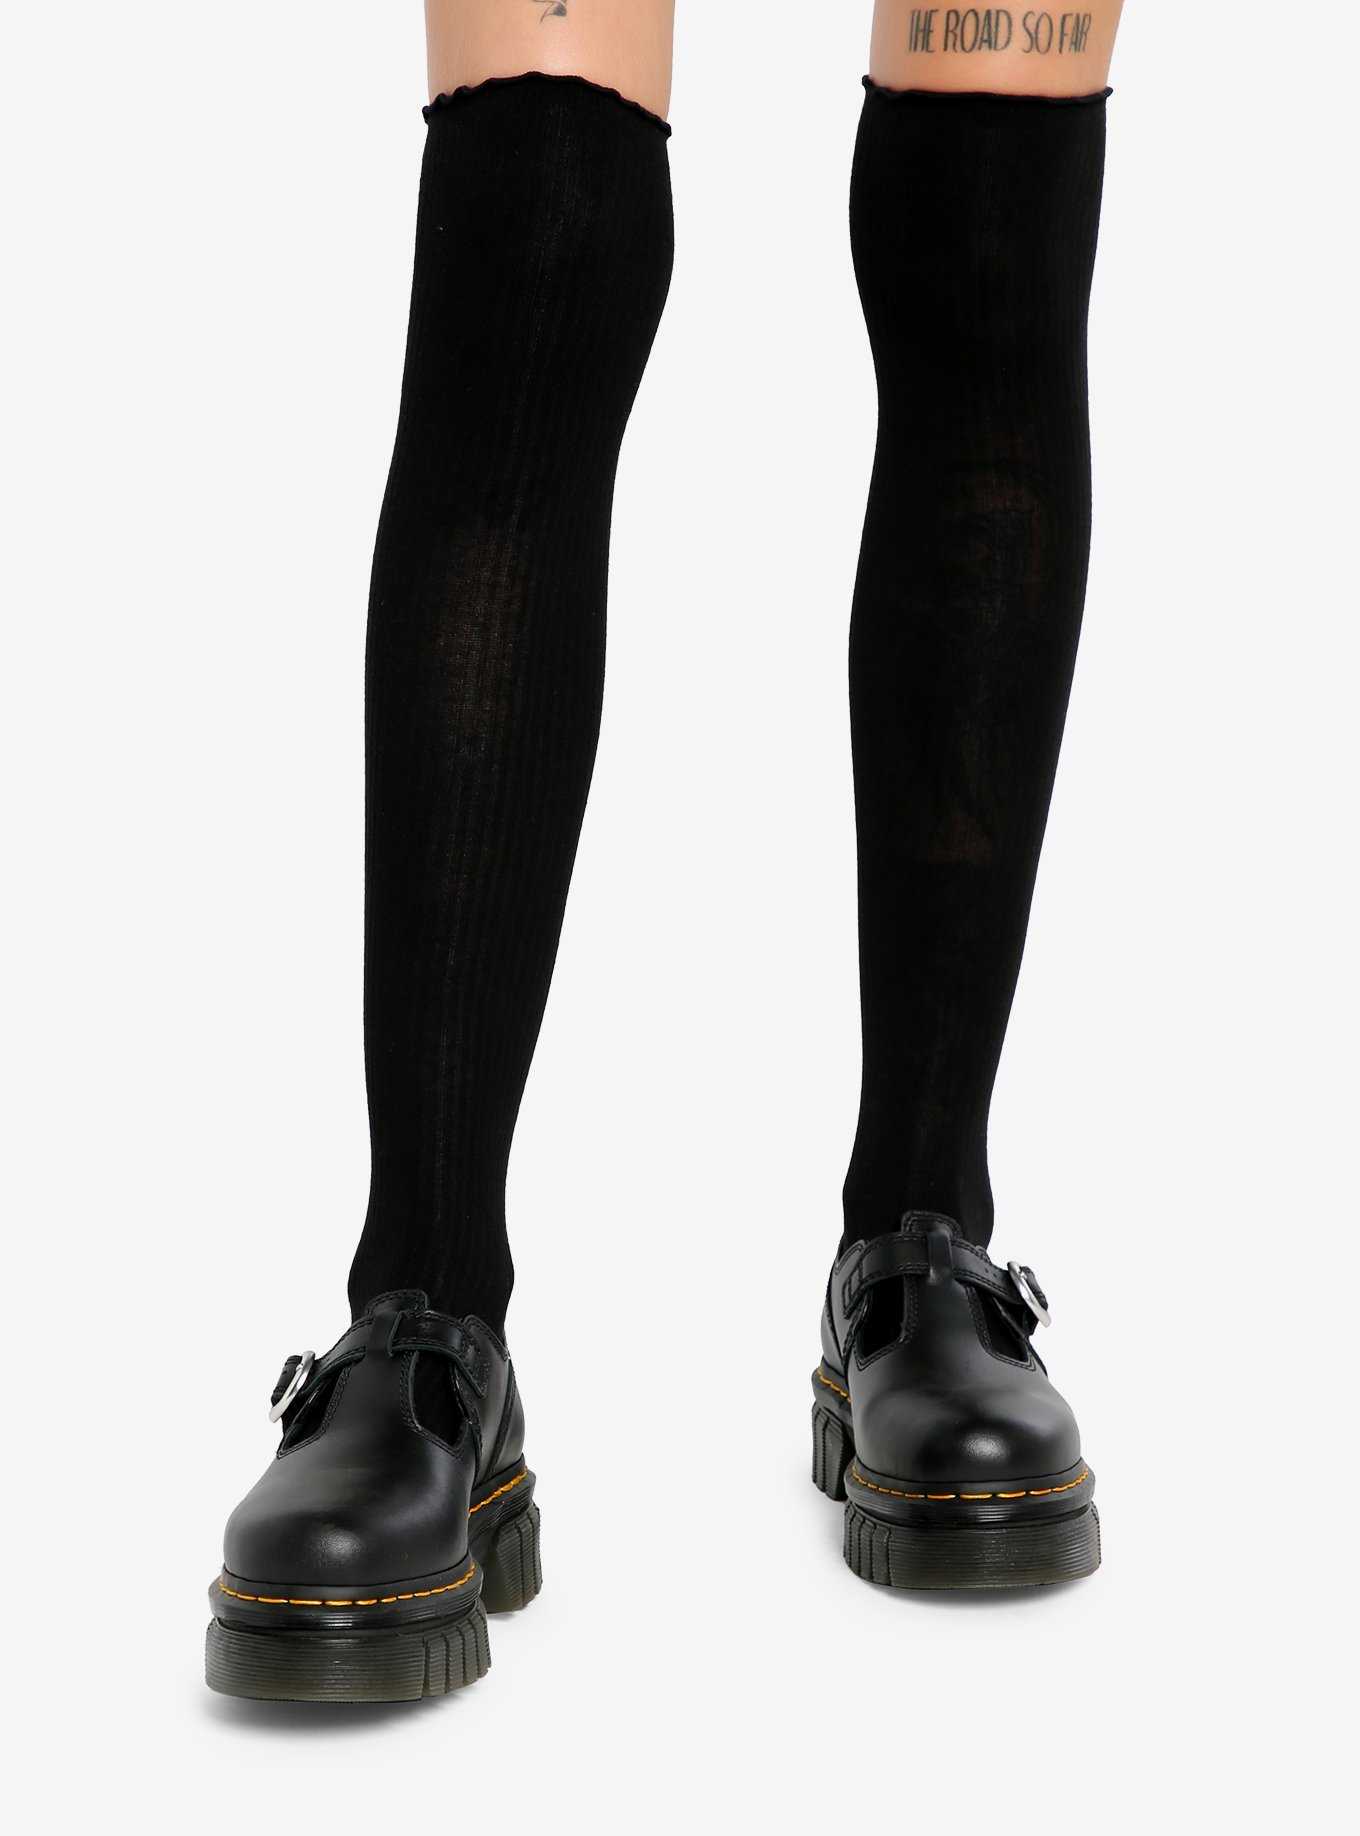 Black Kitty Paw Bow Thigh Highs, Hot Topic